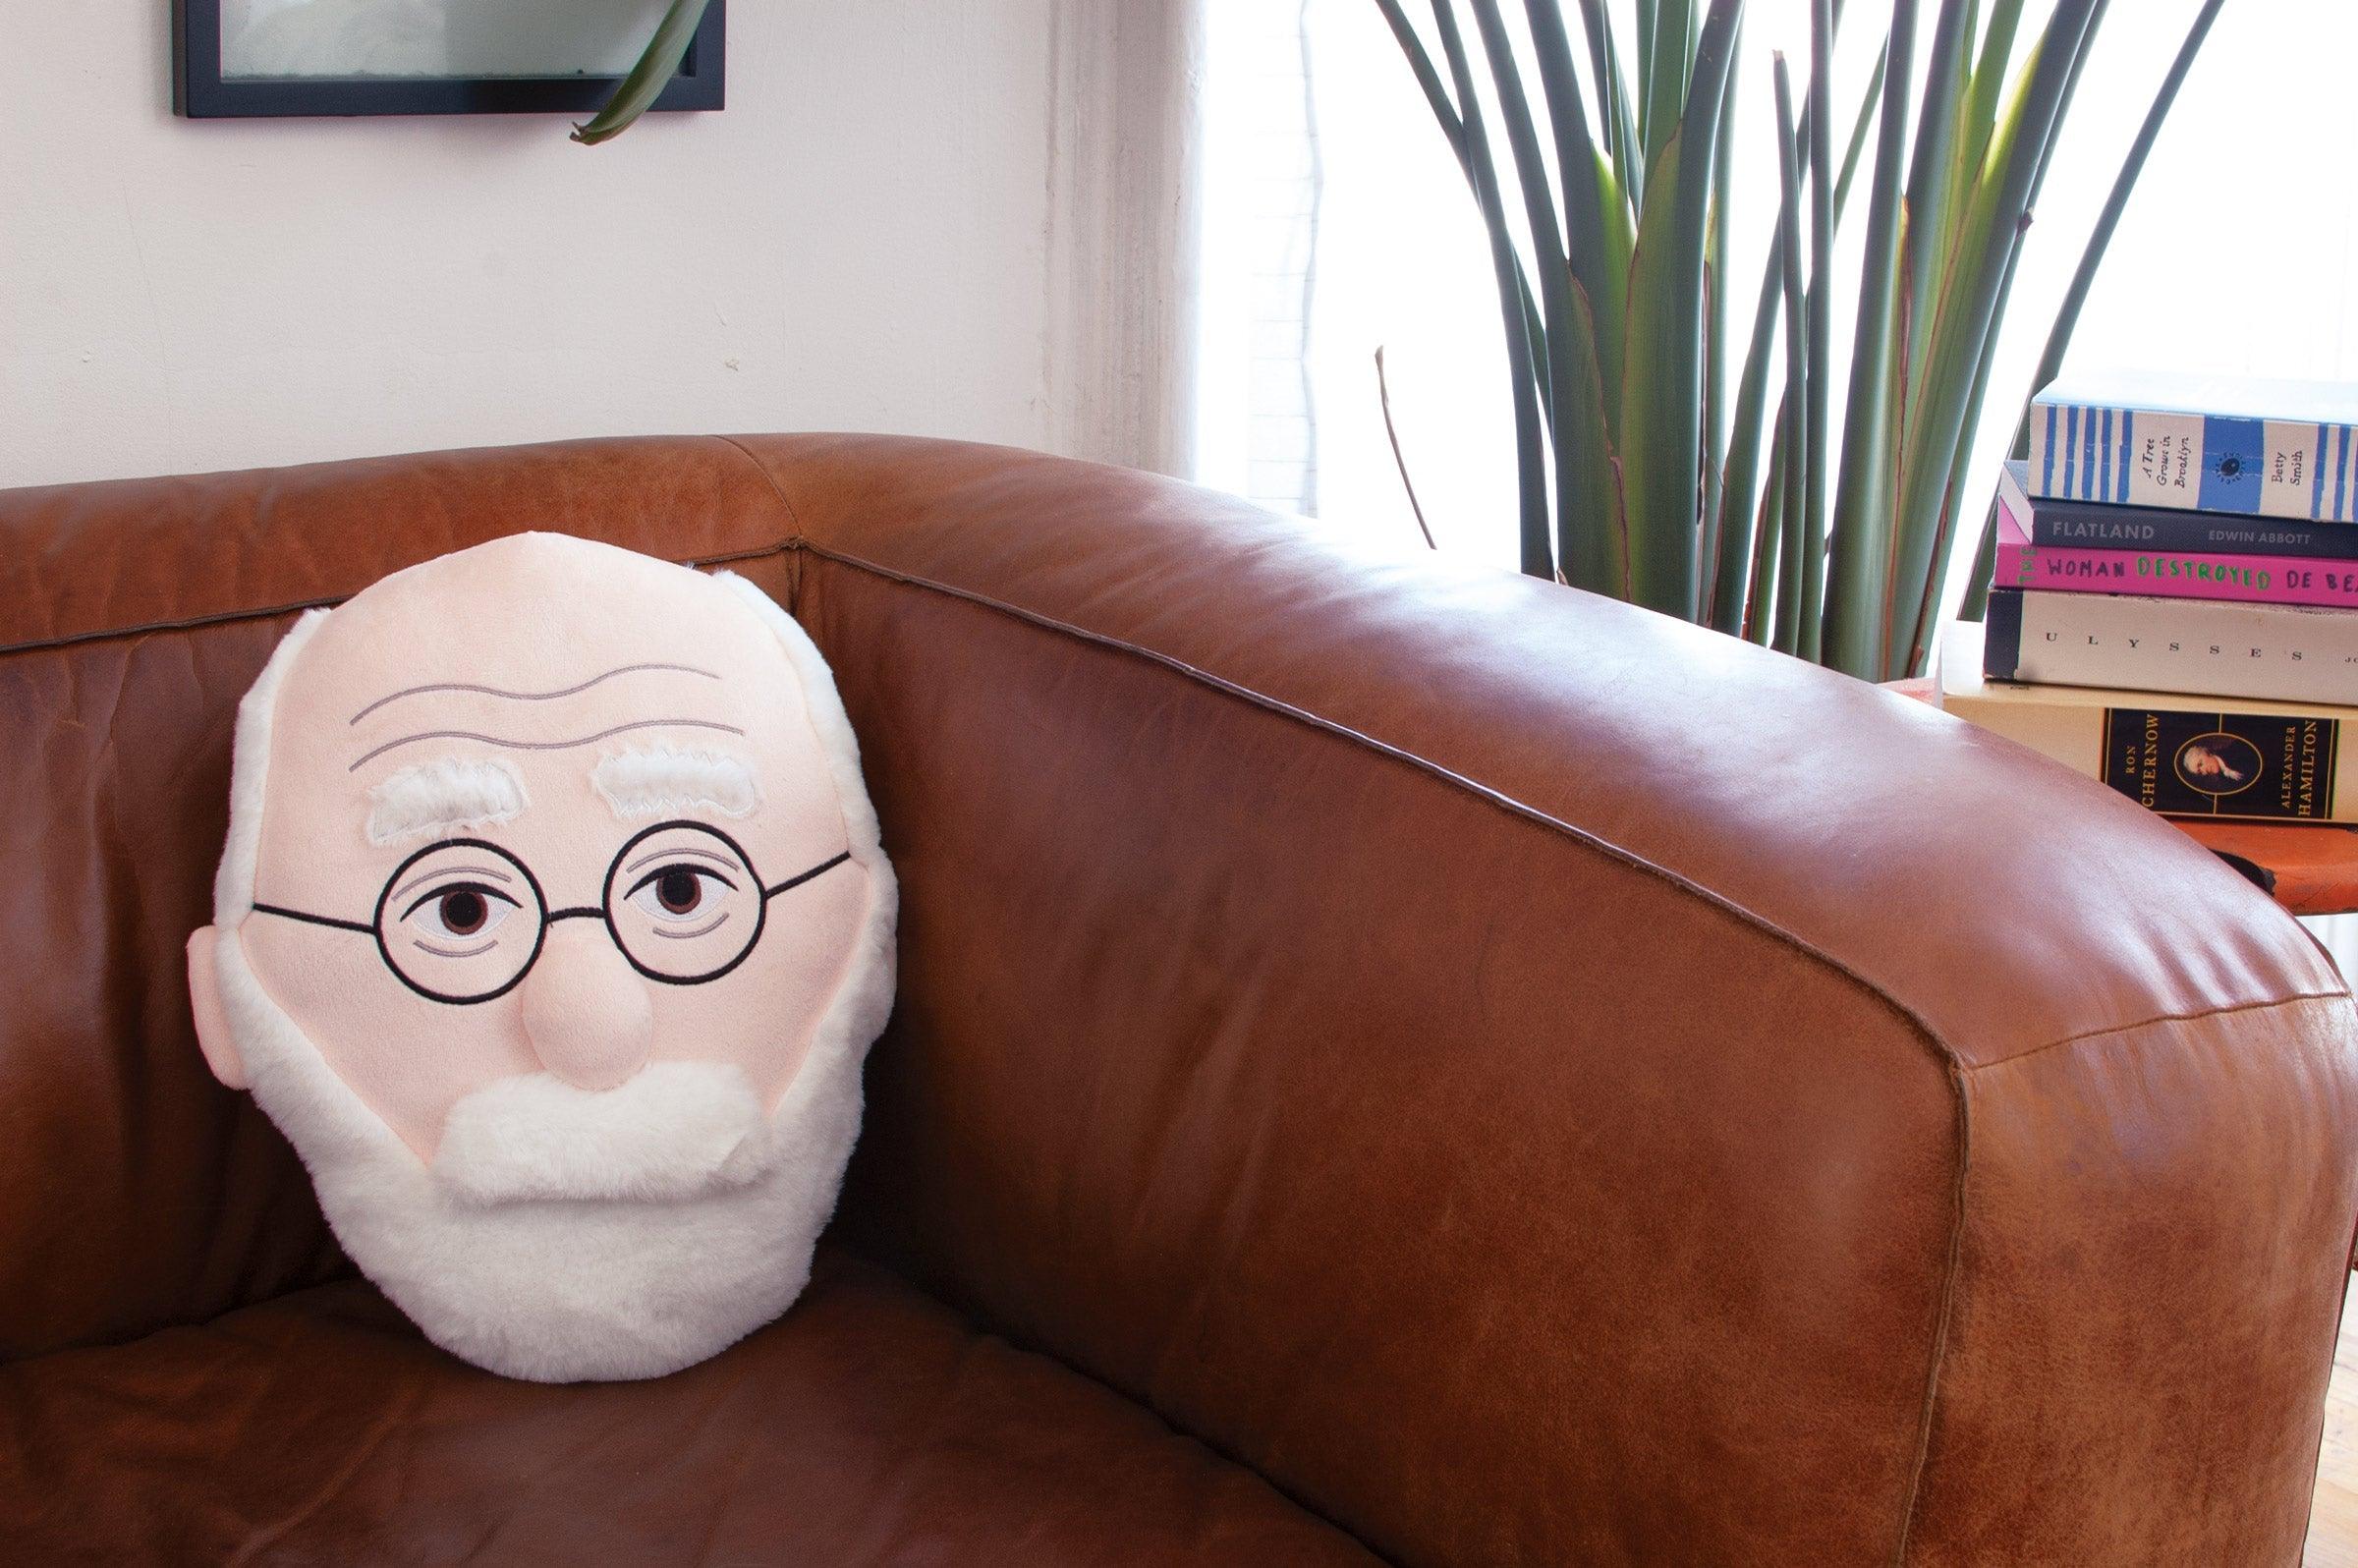 Product photo of Freud Stuffed Portrait, a novelty gift manufactured by The Unemployed Philosophers Guild.